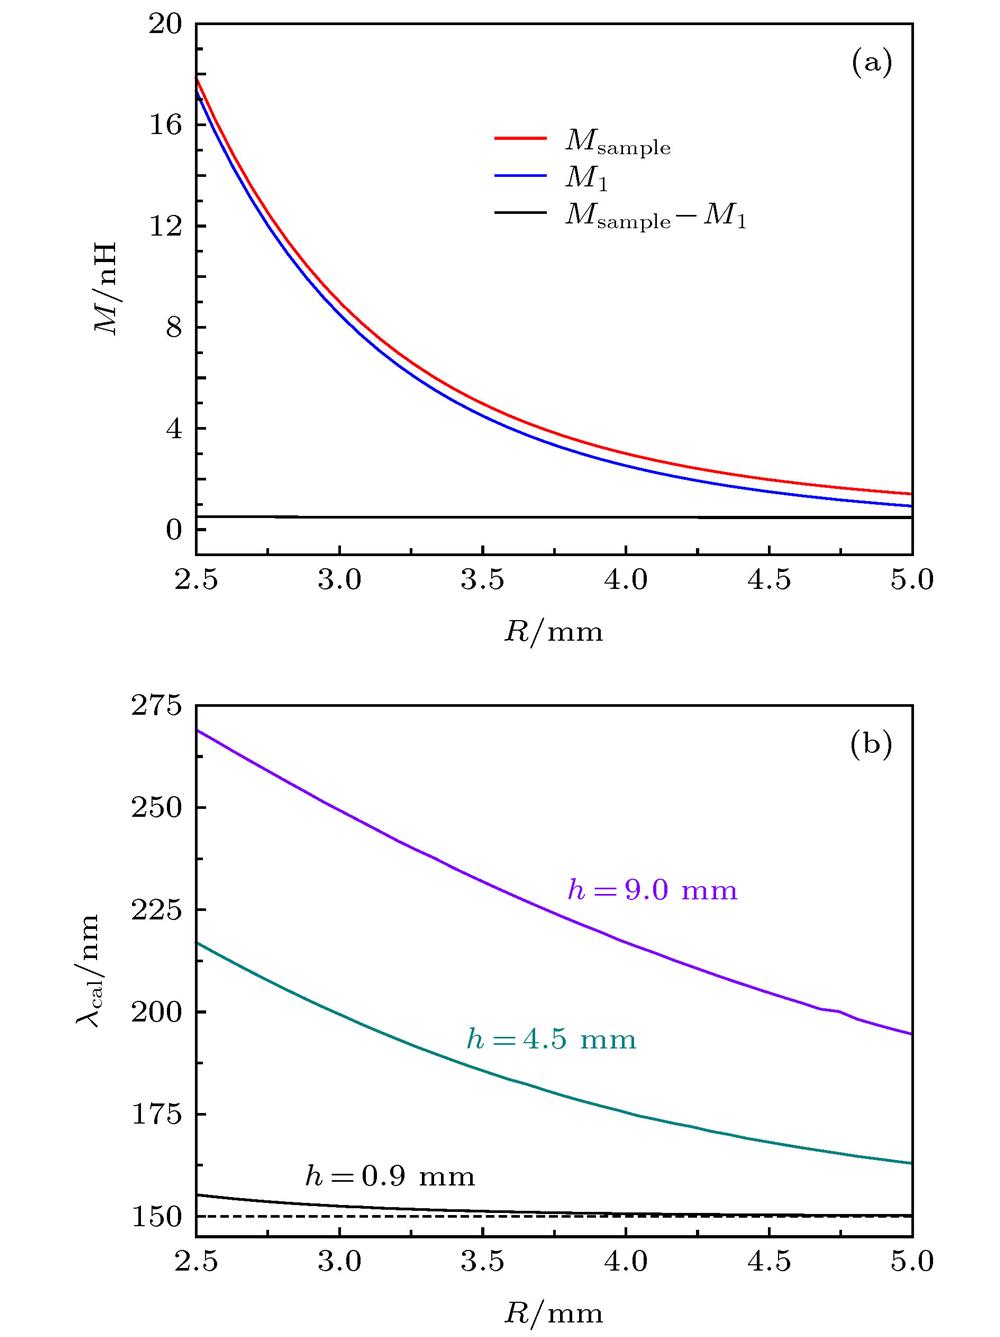 (a) The mutual inductance as a function of film radii R calculated for the typical superconducting film with d = 100 nm, λ = 150 nm; (b) calculations of penetration depth λcal vs film radii R for different spacings between two coils (h = 0.9, 4.5, 9.0 mm). The real penetration depth (λ = 150 nm) is indicated by the dotted line.